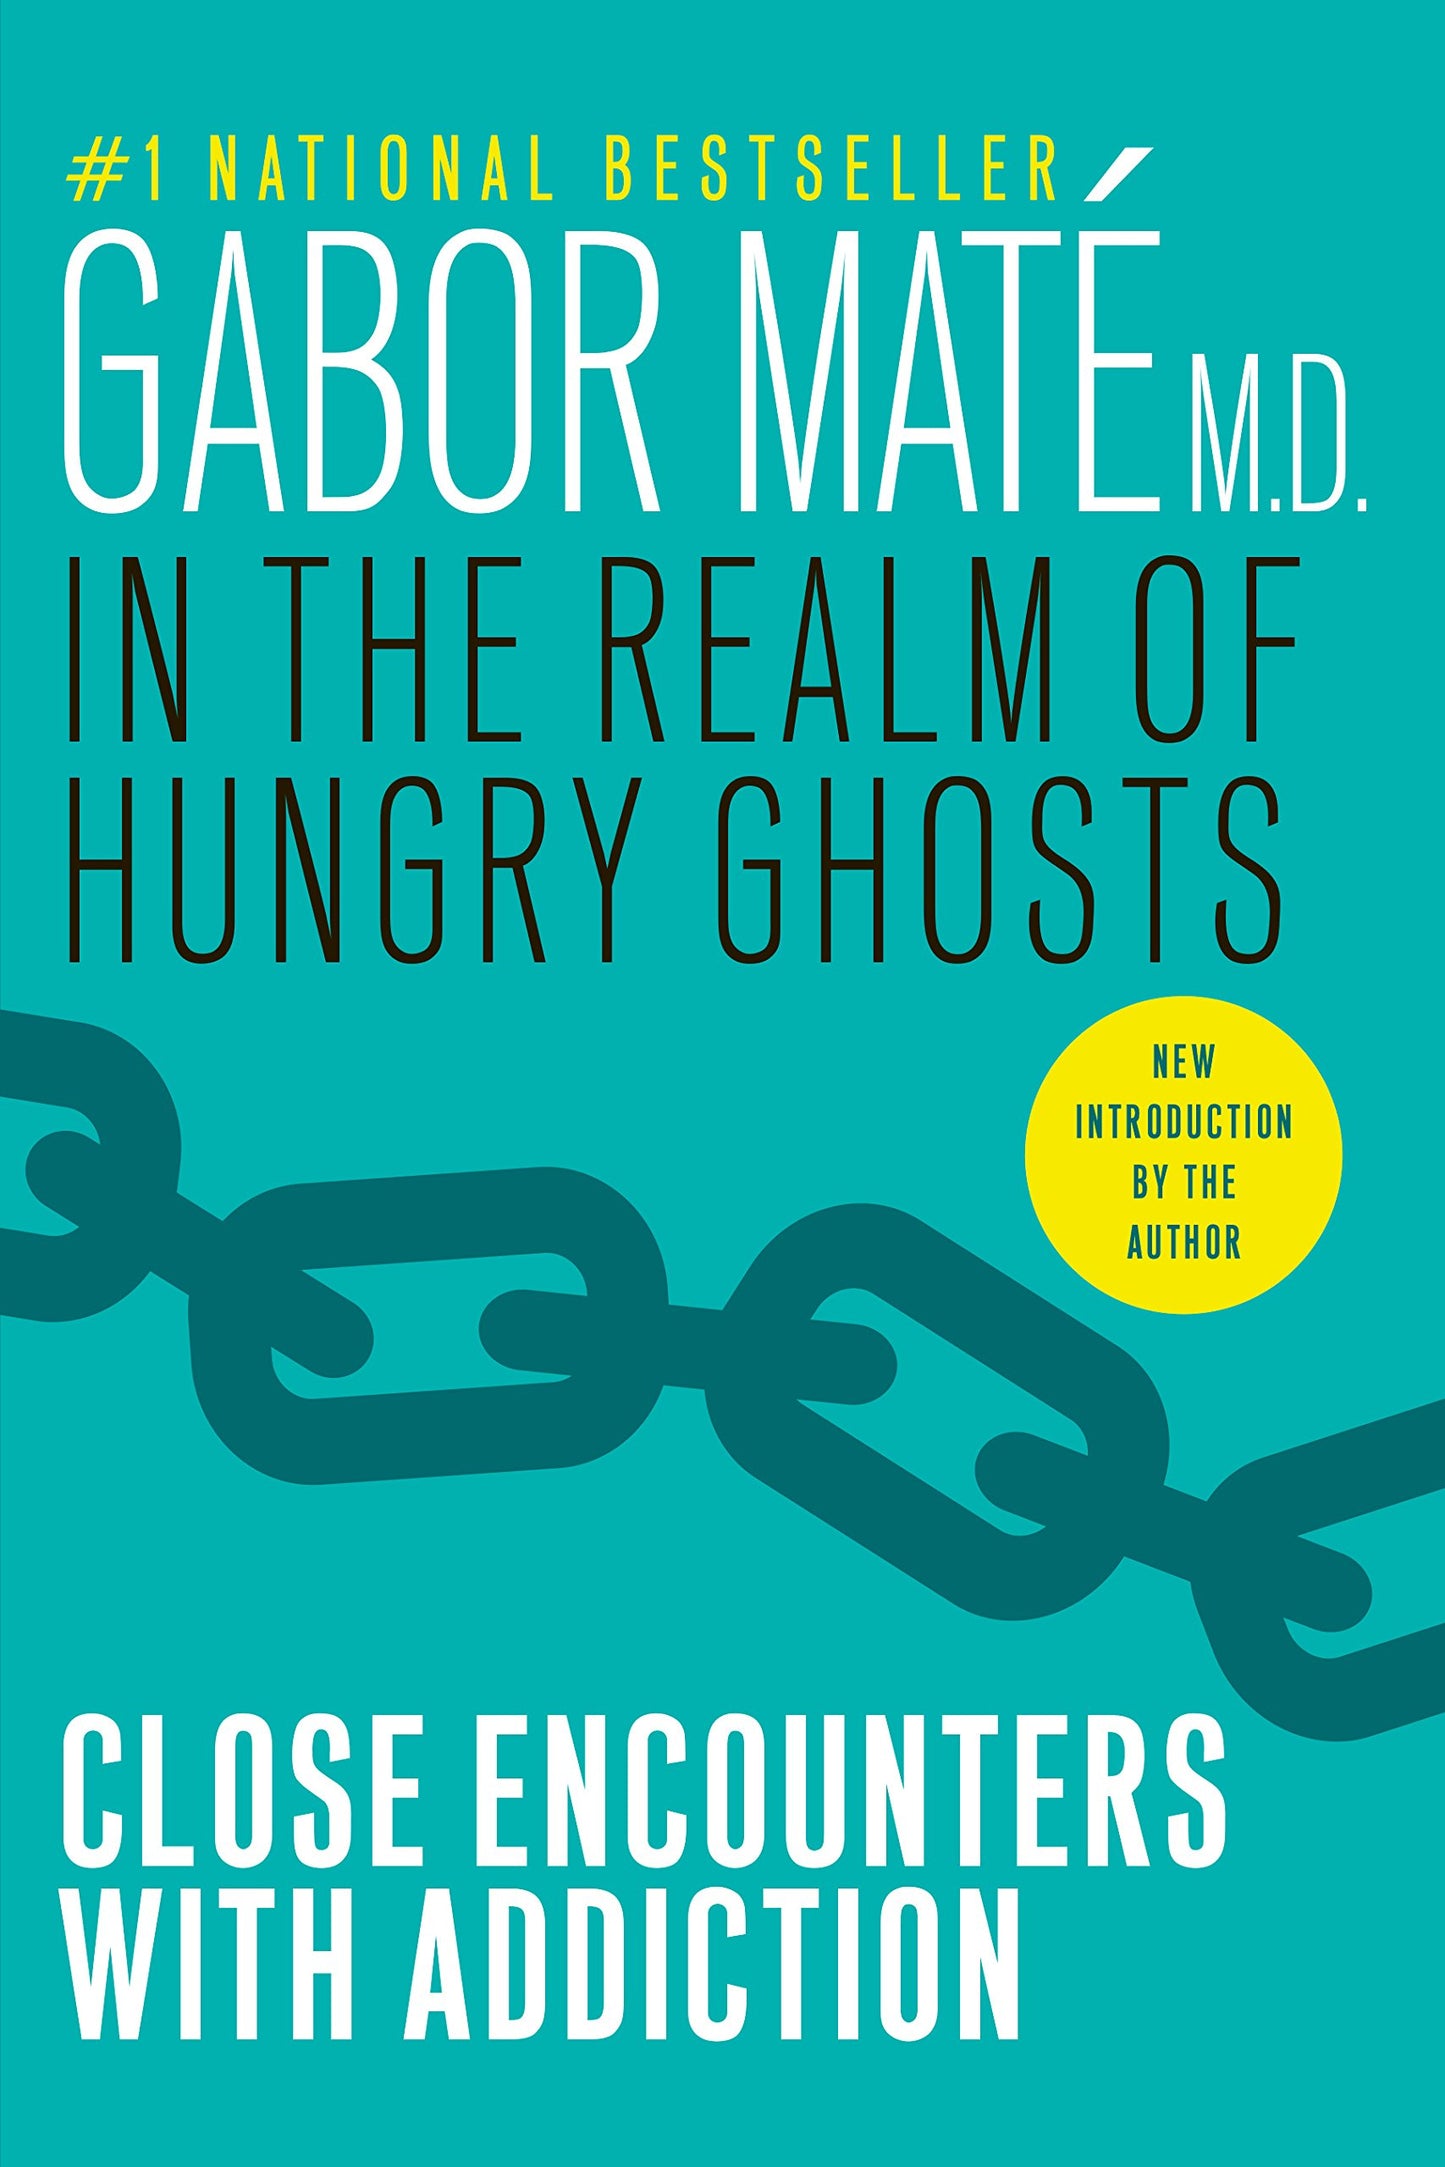 In the Realm of Hungry Ghosts - Close Encounters with Addiction by Gabor Maté